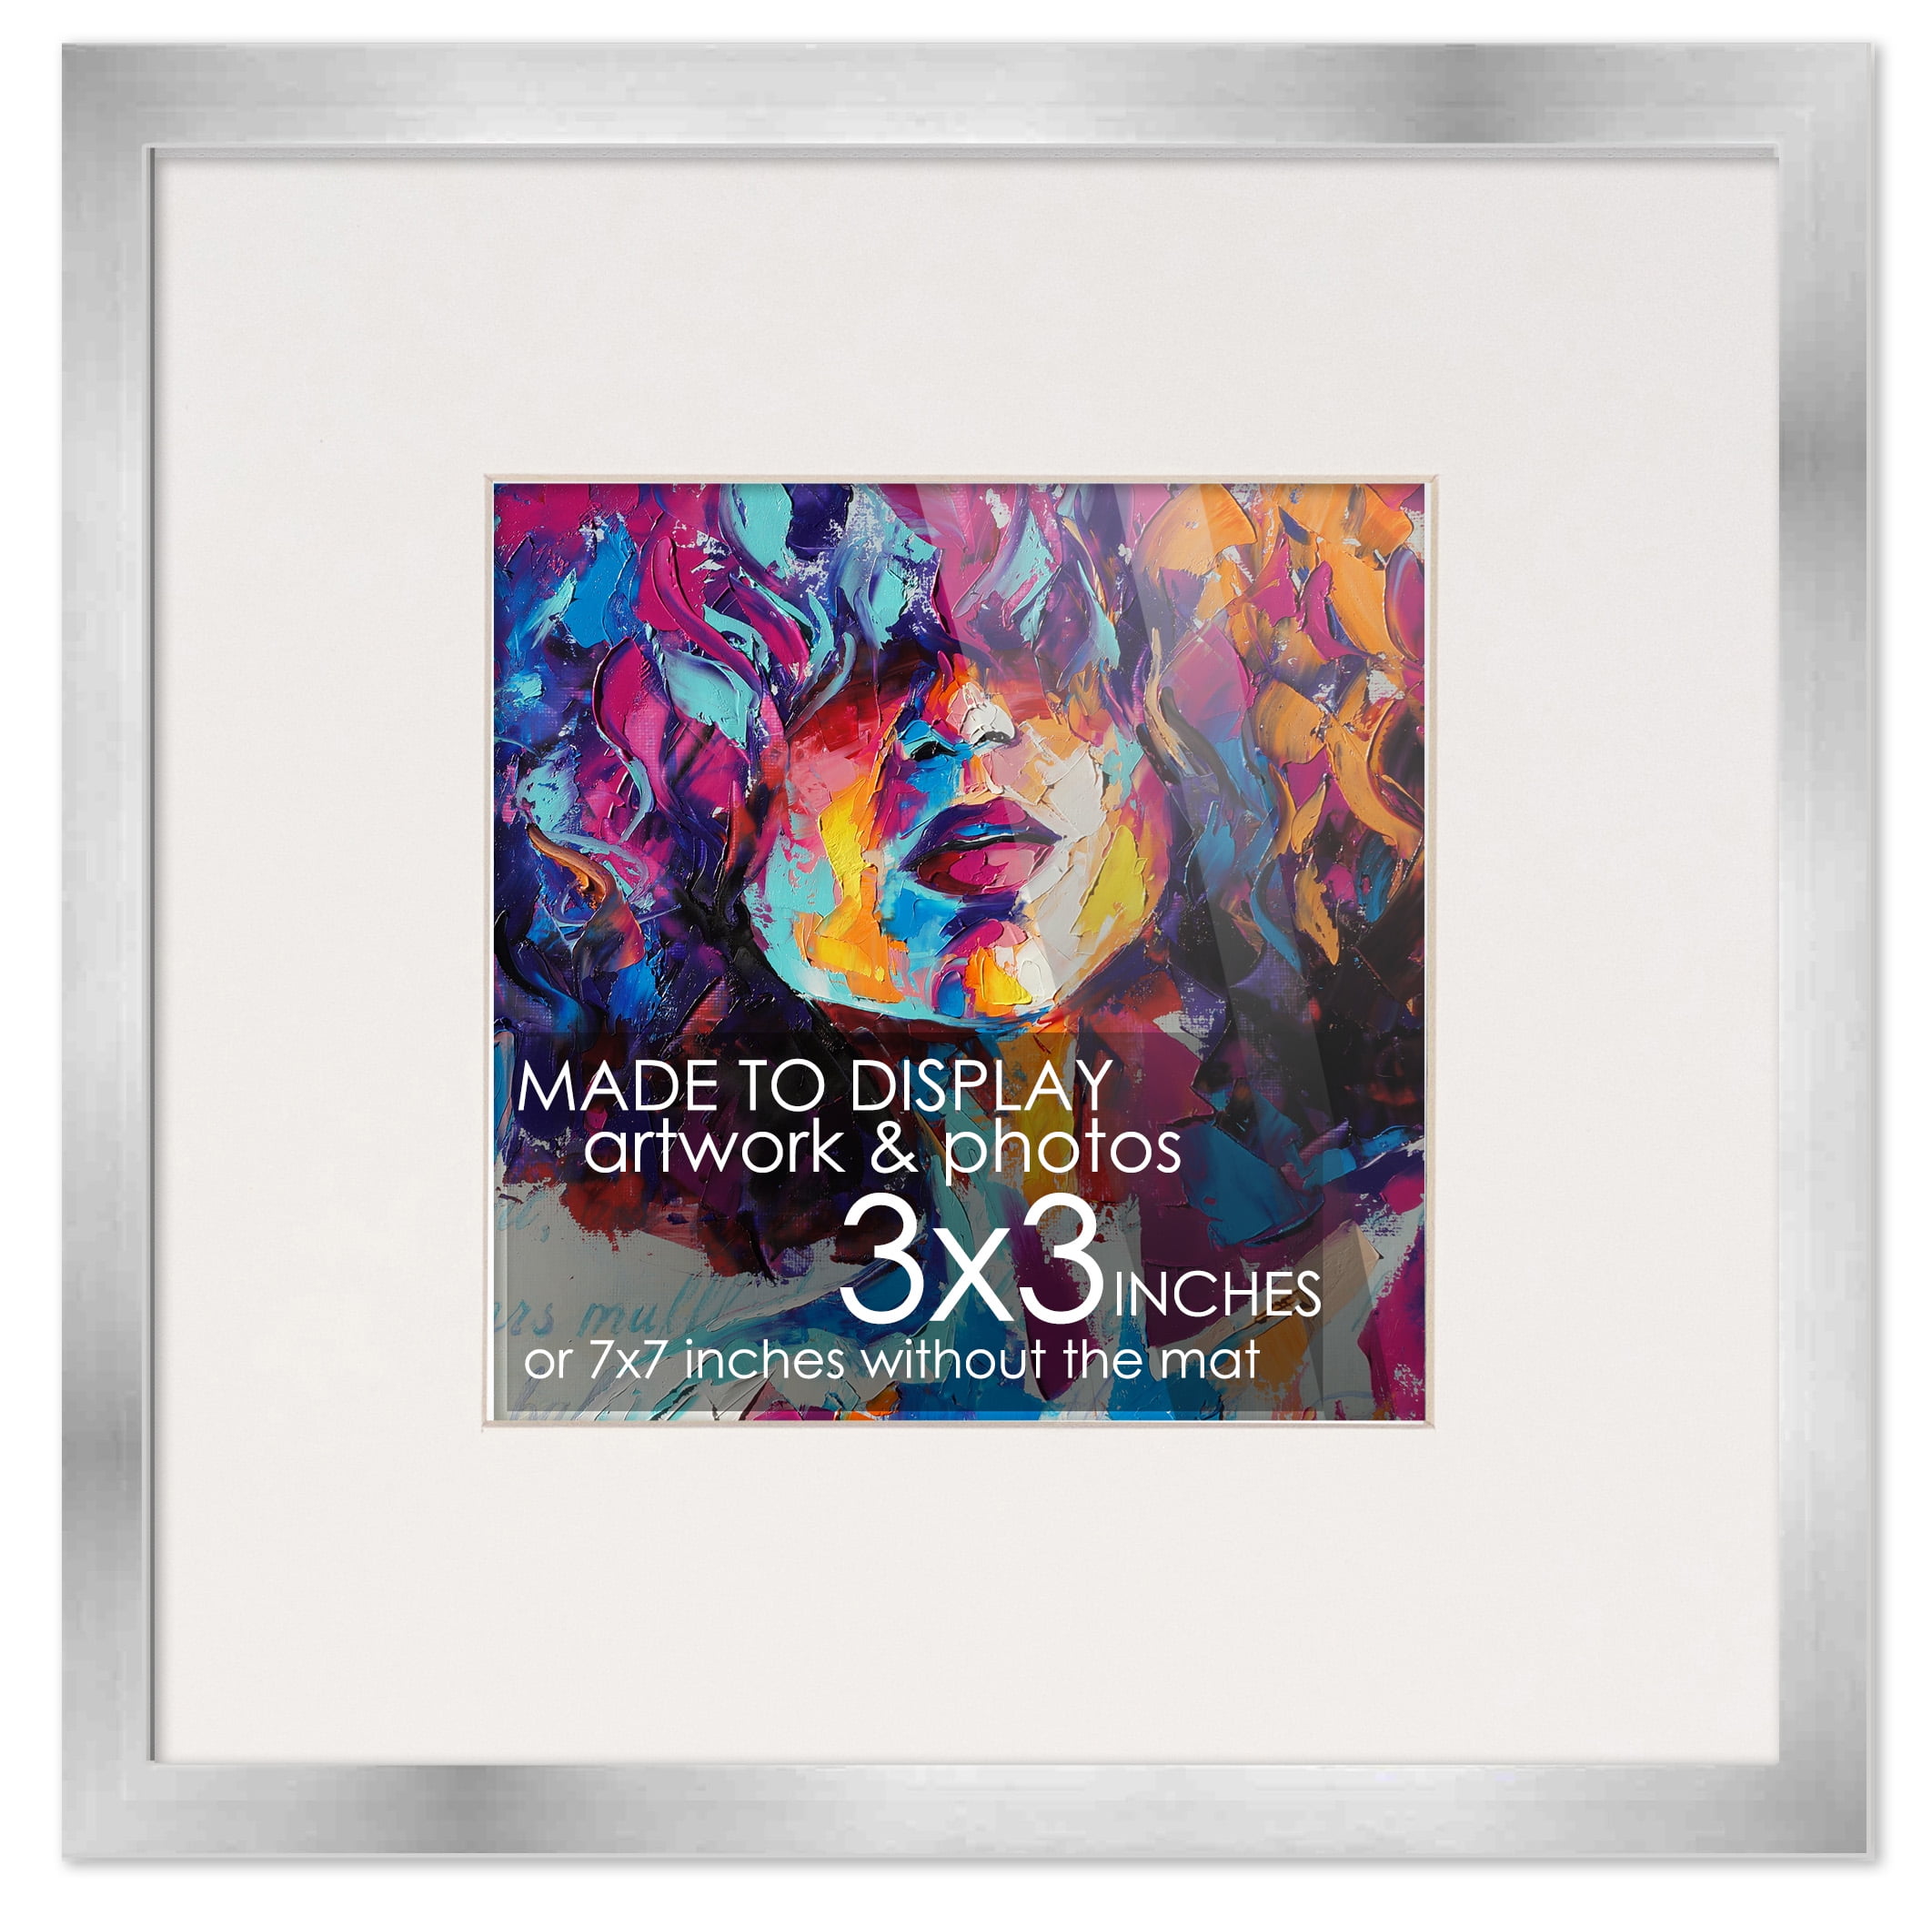 30x30 Frame Silver Matted for 30x30 Picture or 34x34 Art Poster Without Photo Mat Display Your, Size: 30 x 30